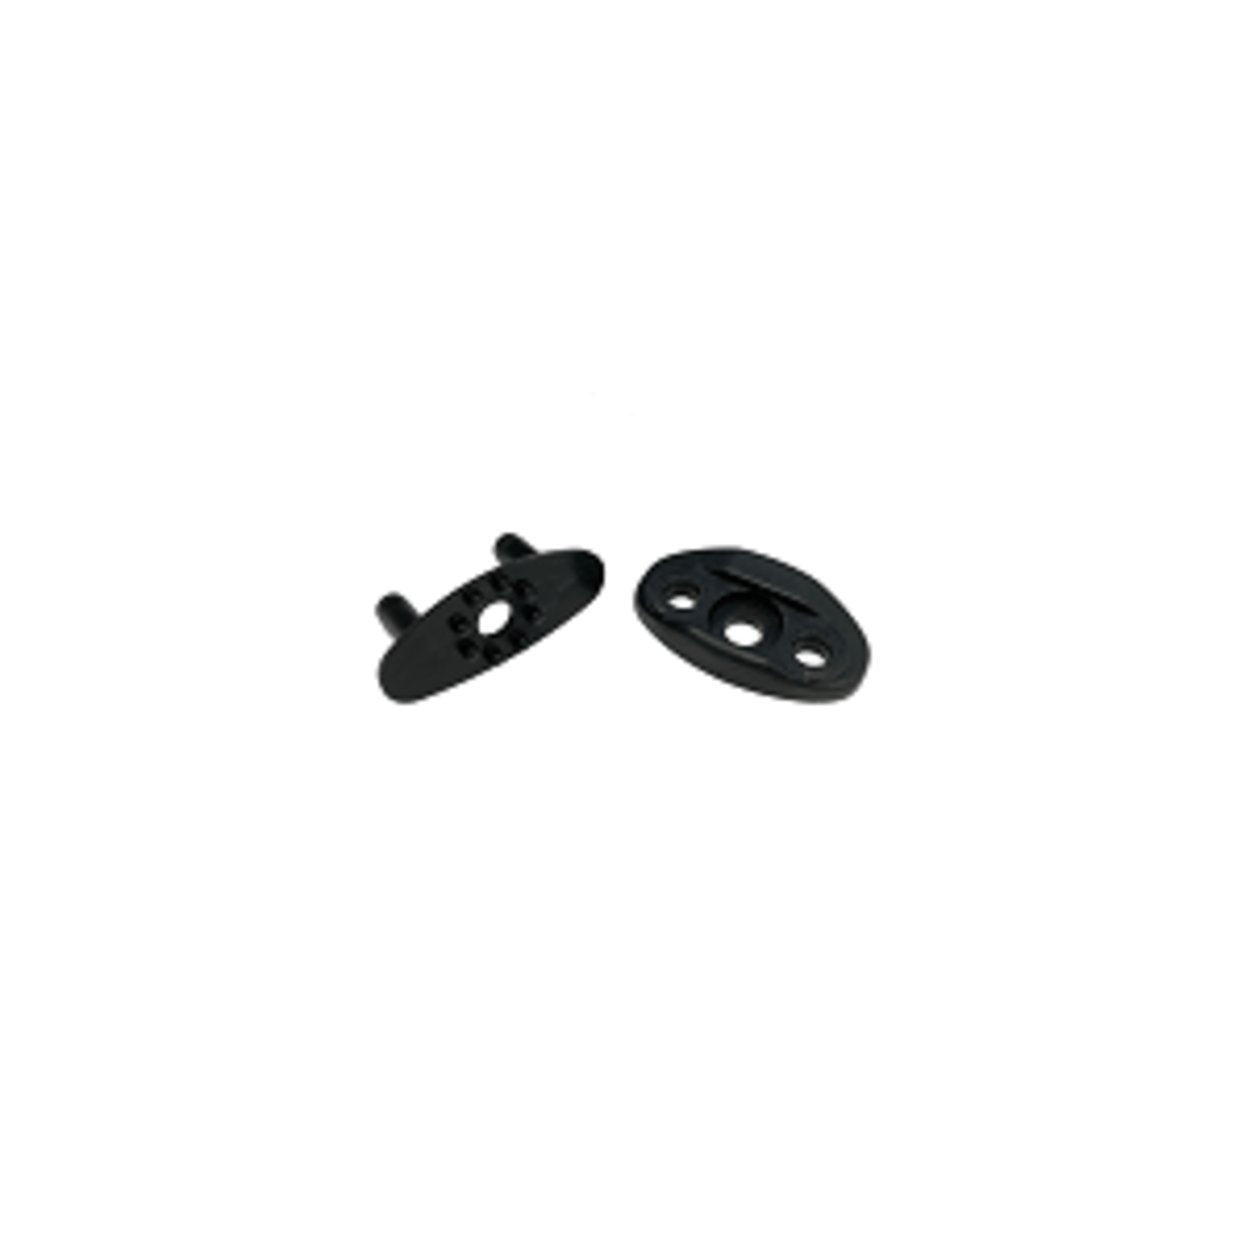 Duotone plastic top+bottom washer for footstrap (2pcs) (DTW/FA) 2024 - Worthing Watersports - 9010583199528 - Spareparts - Duotone Windsurfing